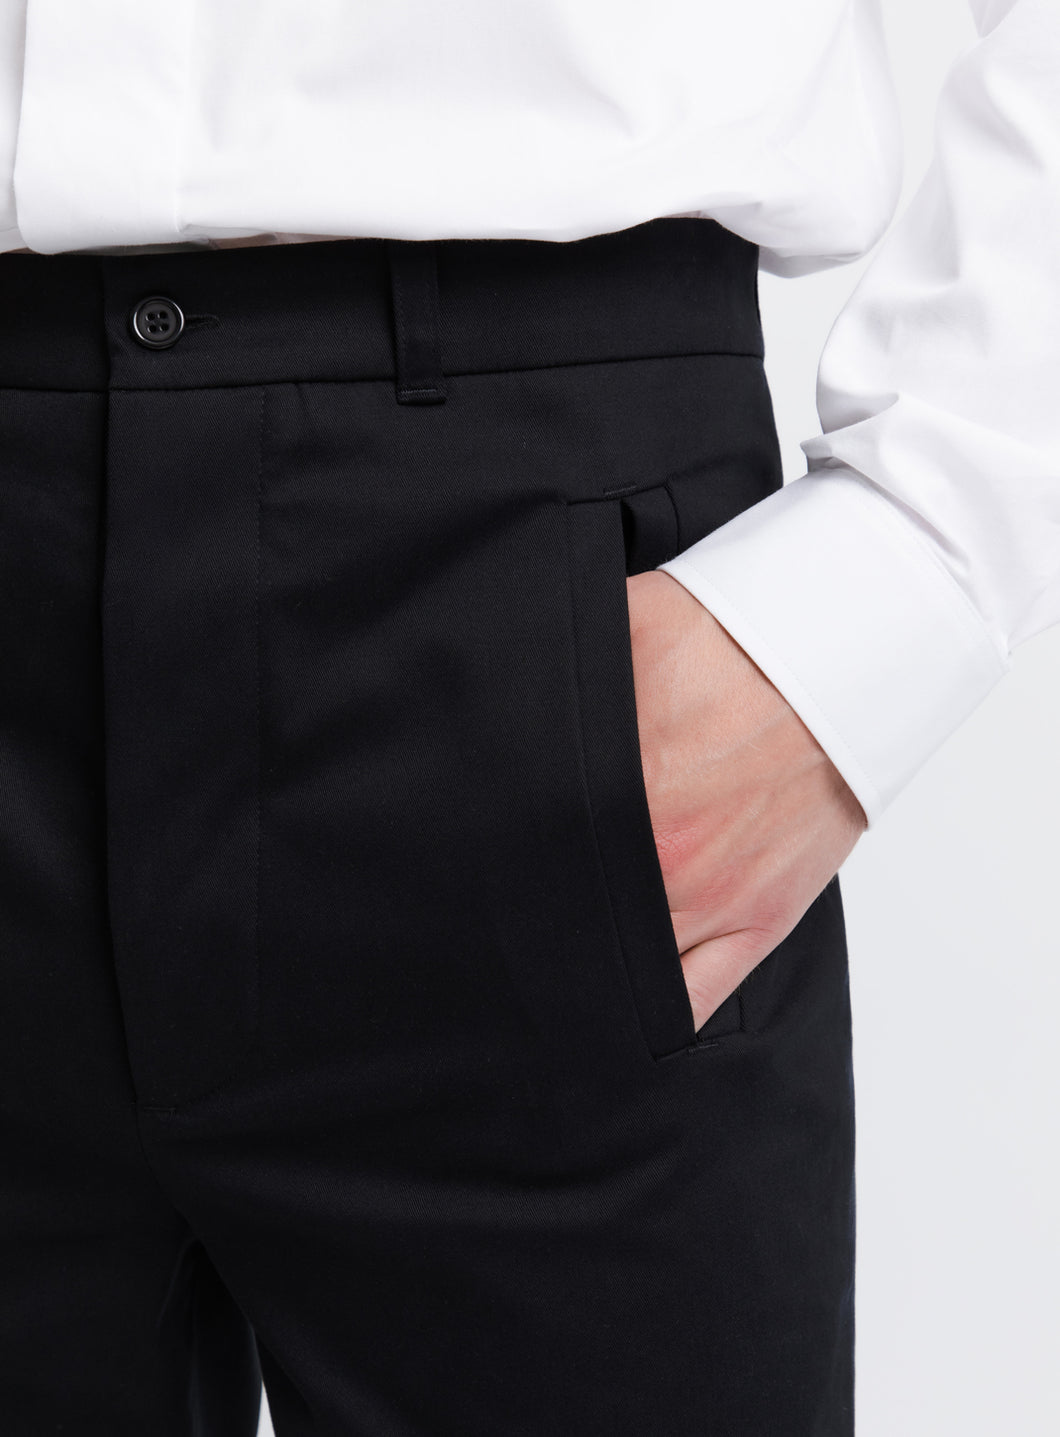 Pants with Piped Pockets in Navy Blue Cotton Gabardine